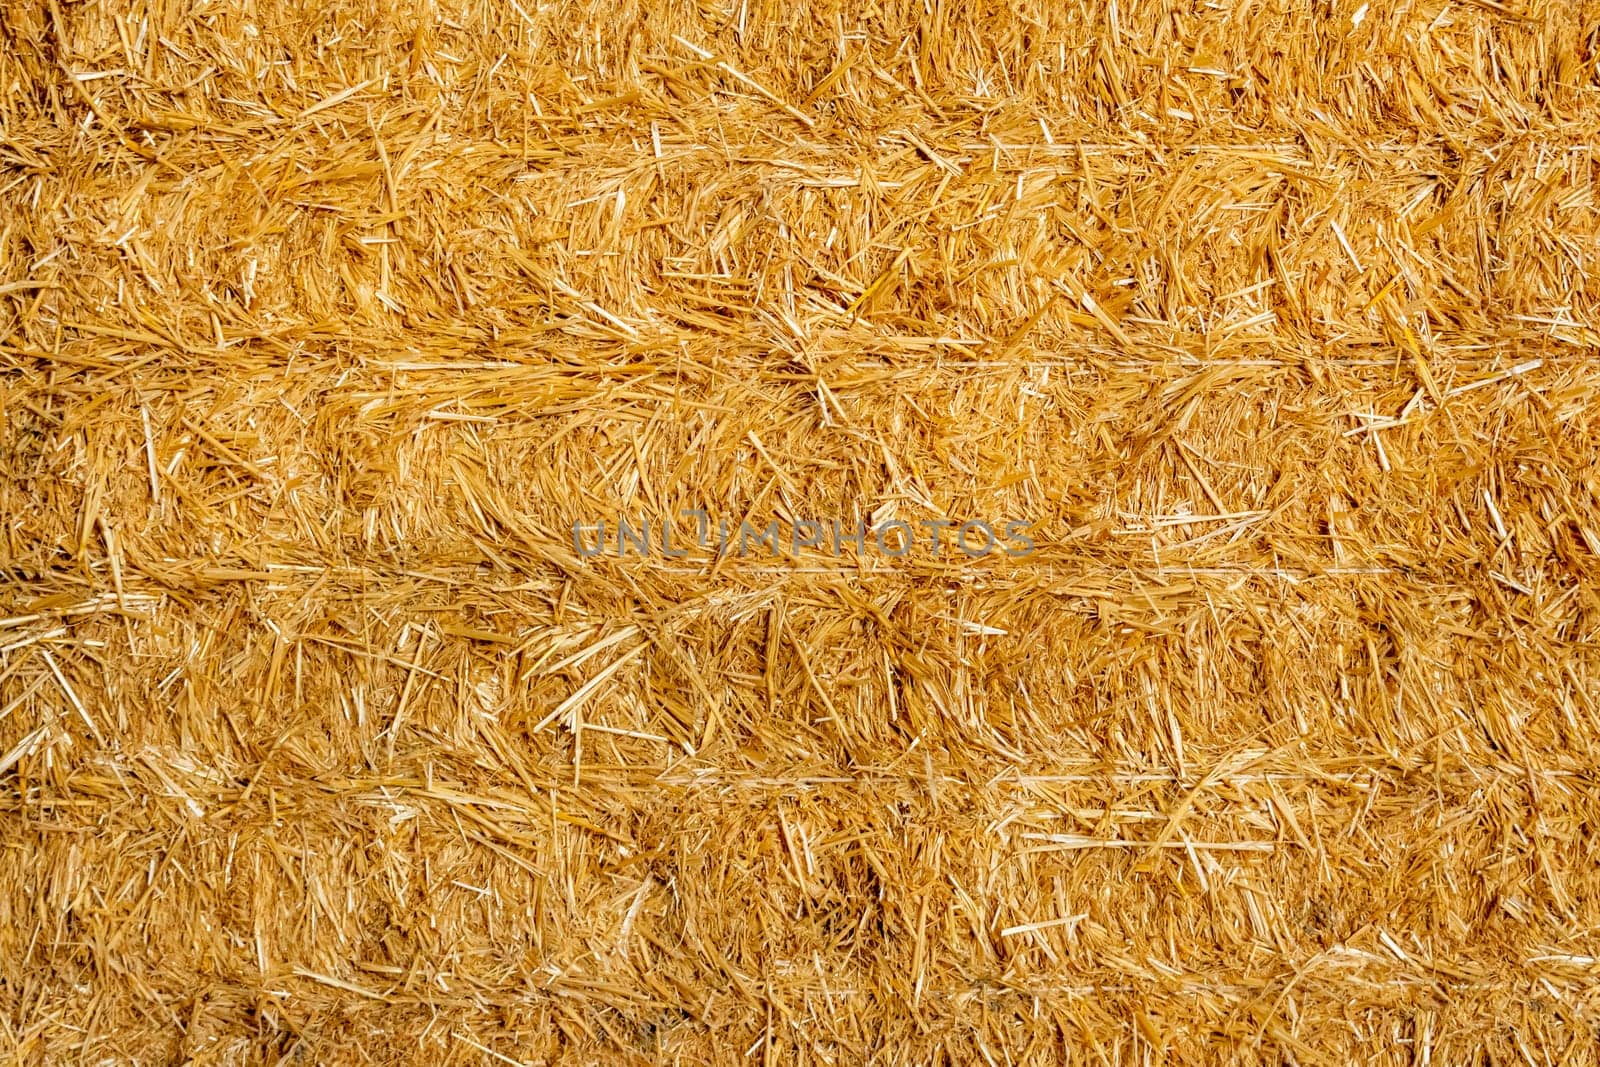 Golden straw stack tightened with straps. Texture background of yellow straw bale